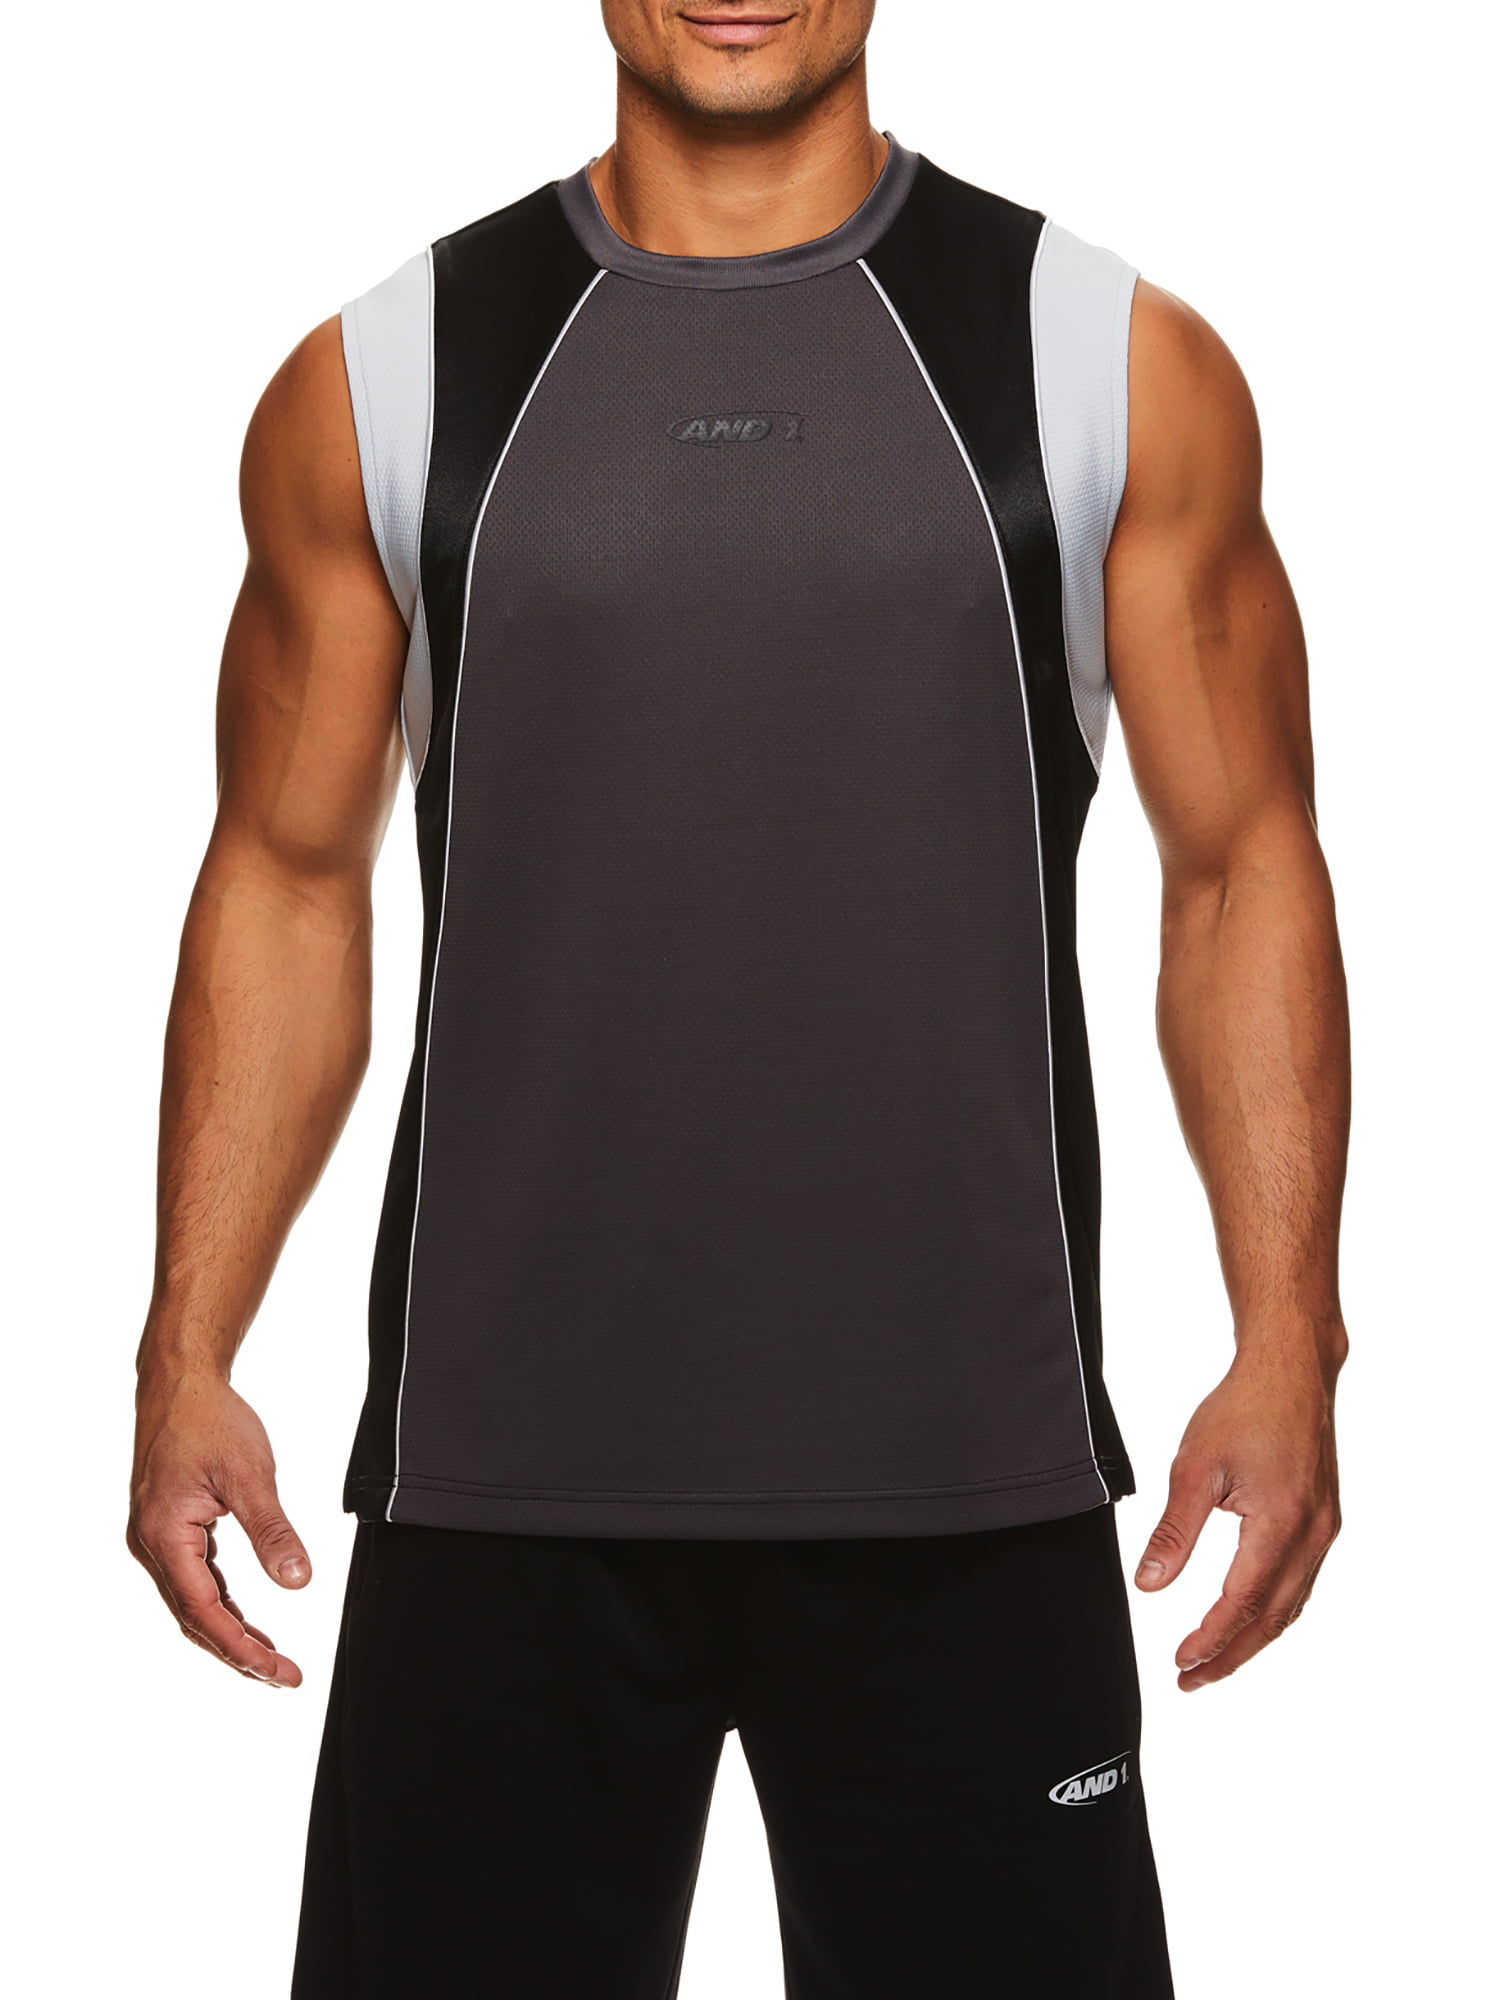 AND1 - AND1 Men's Exile Sleeveless Jersey Tank Top, up to 2XL - Walmart ...